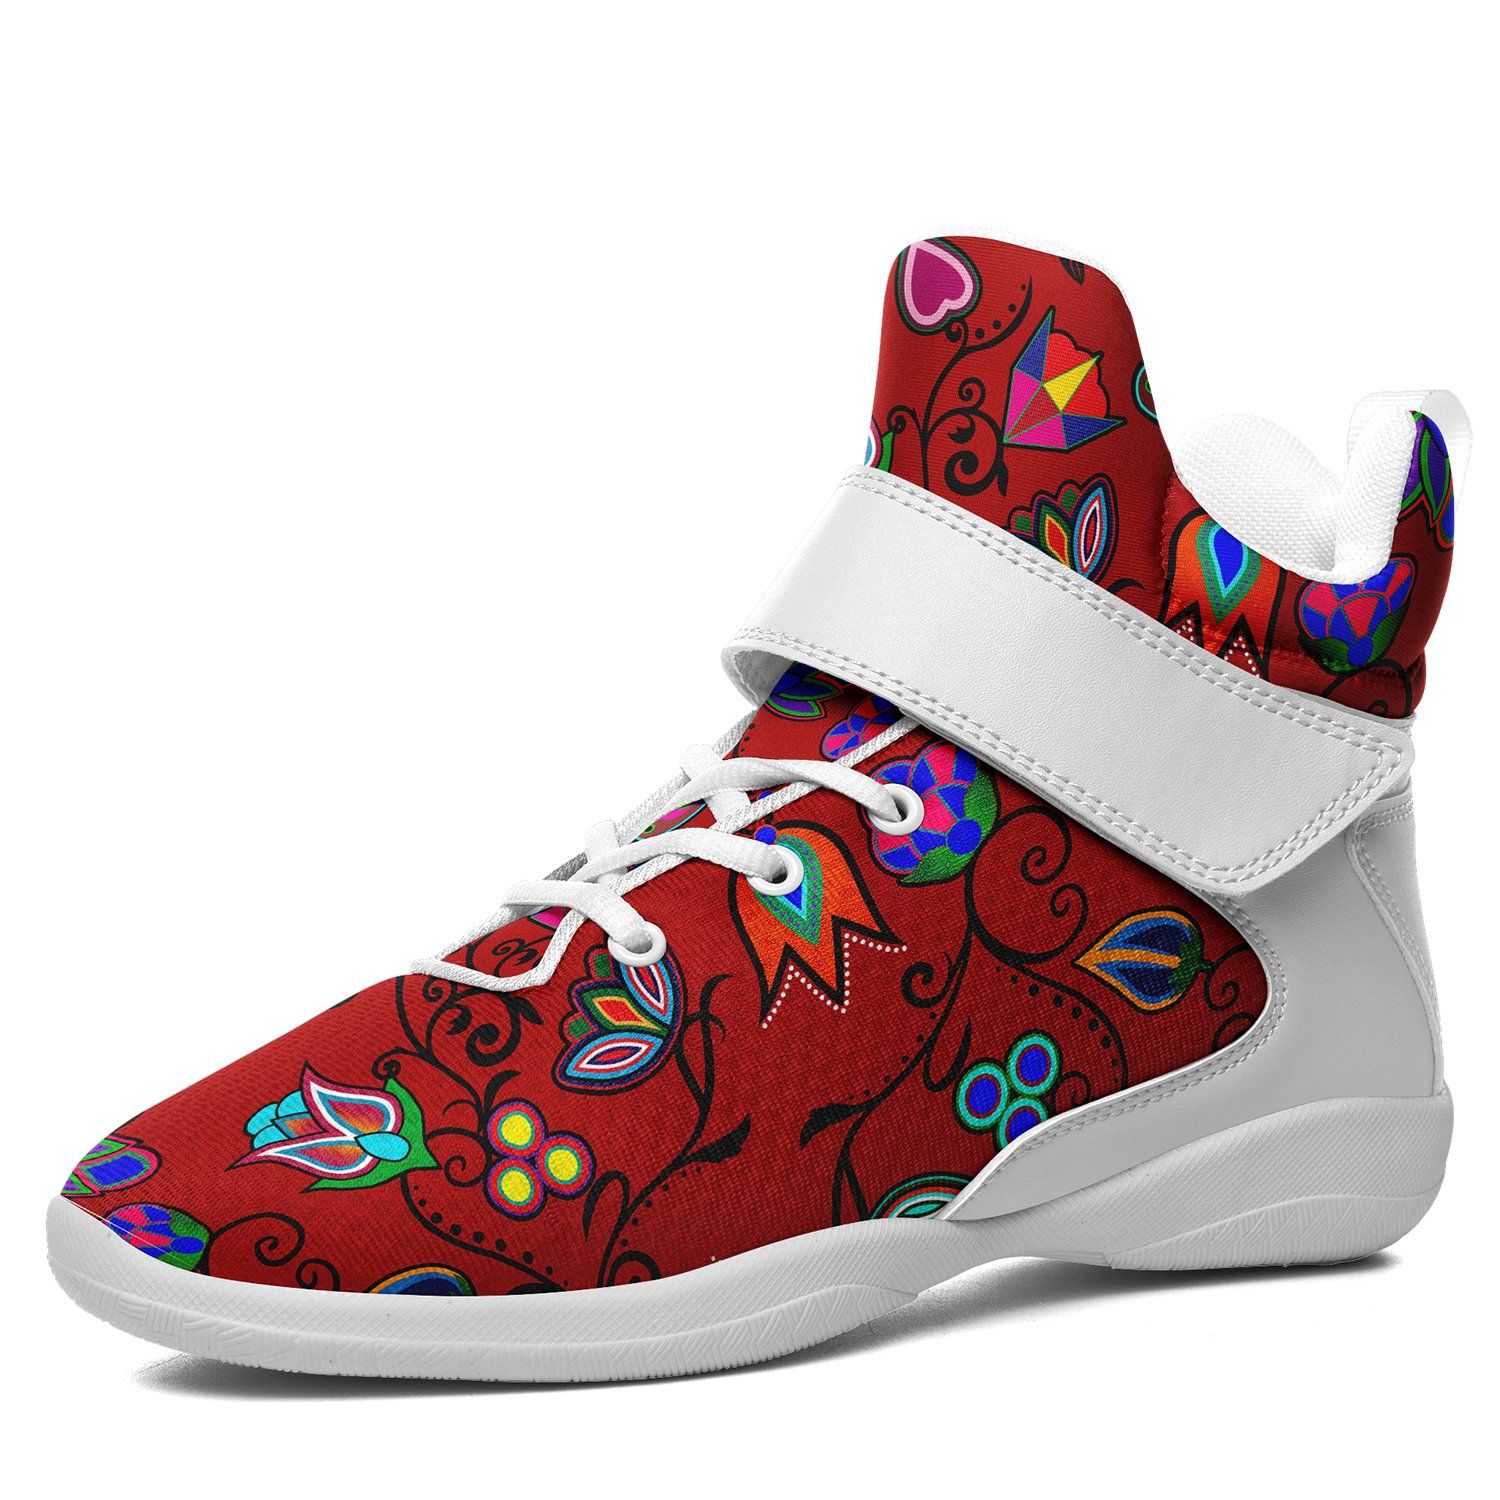 Indigenous Paisley Dahlia Ipottaa Basketball / Sport High Top Shoes 49 Dzine US Women 4.5 / US Youth 3.5 / EUR 35 White Sole with White Strap 